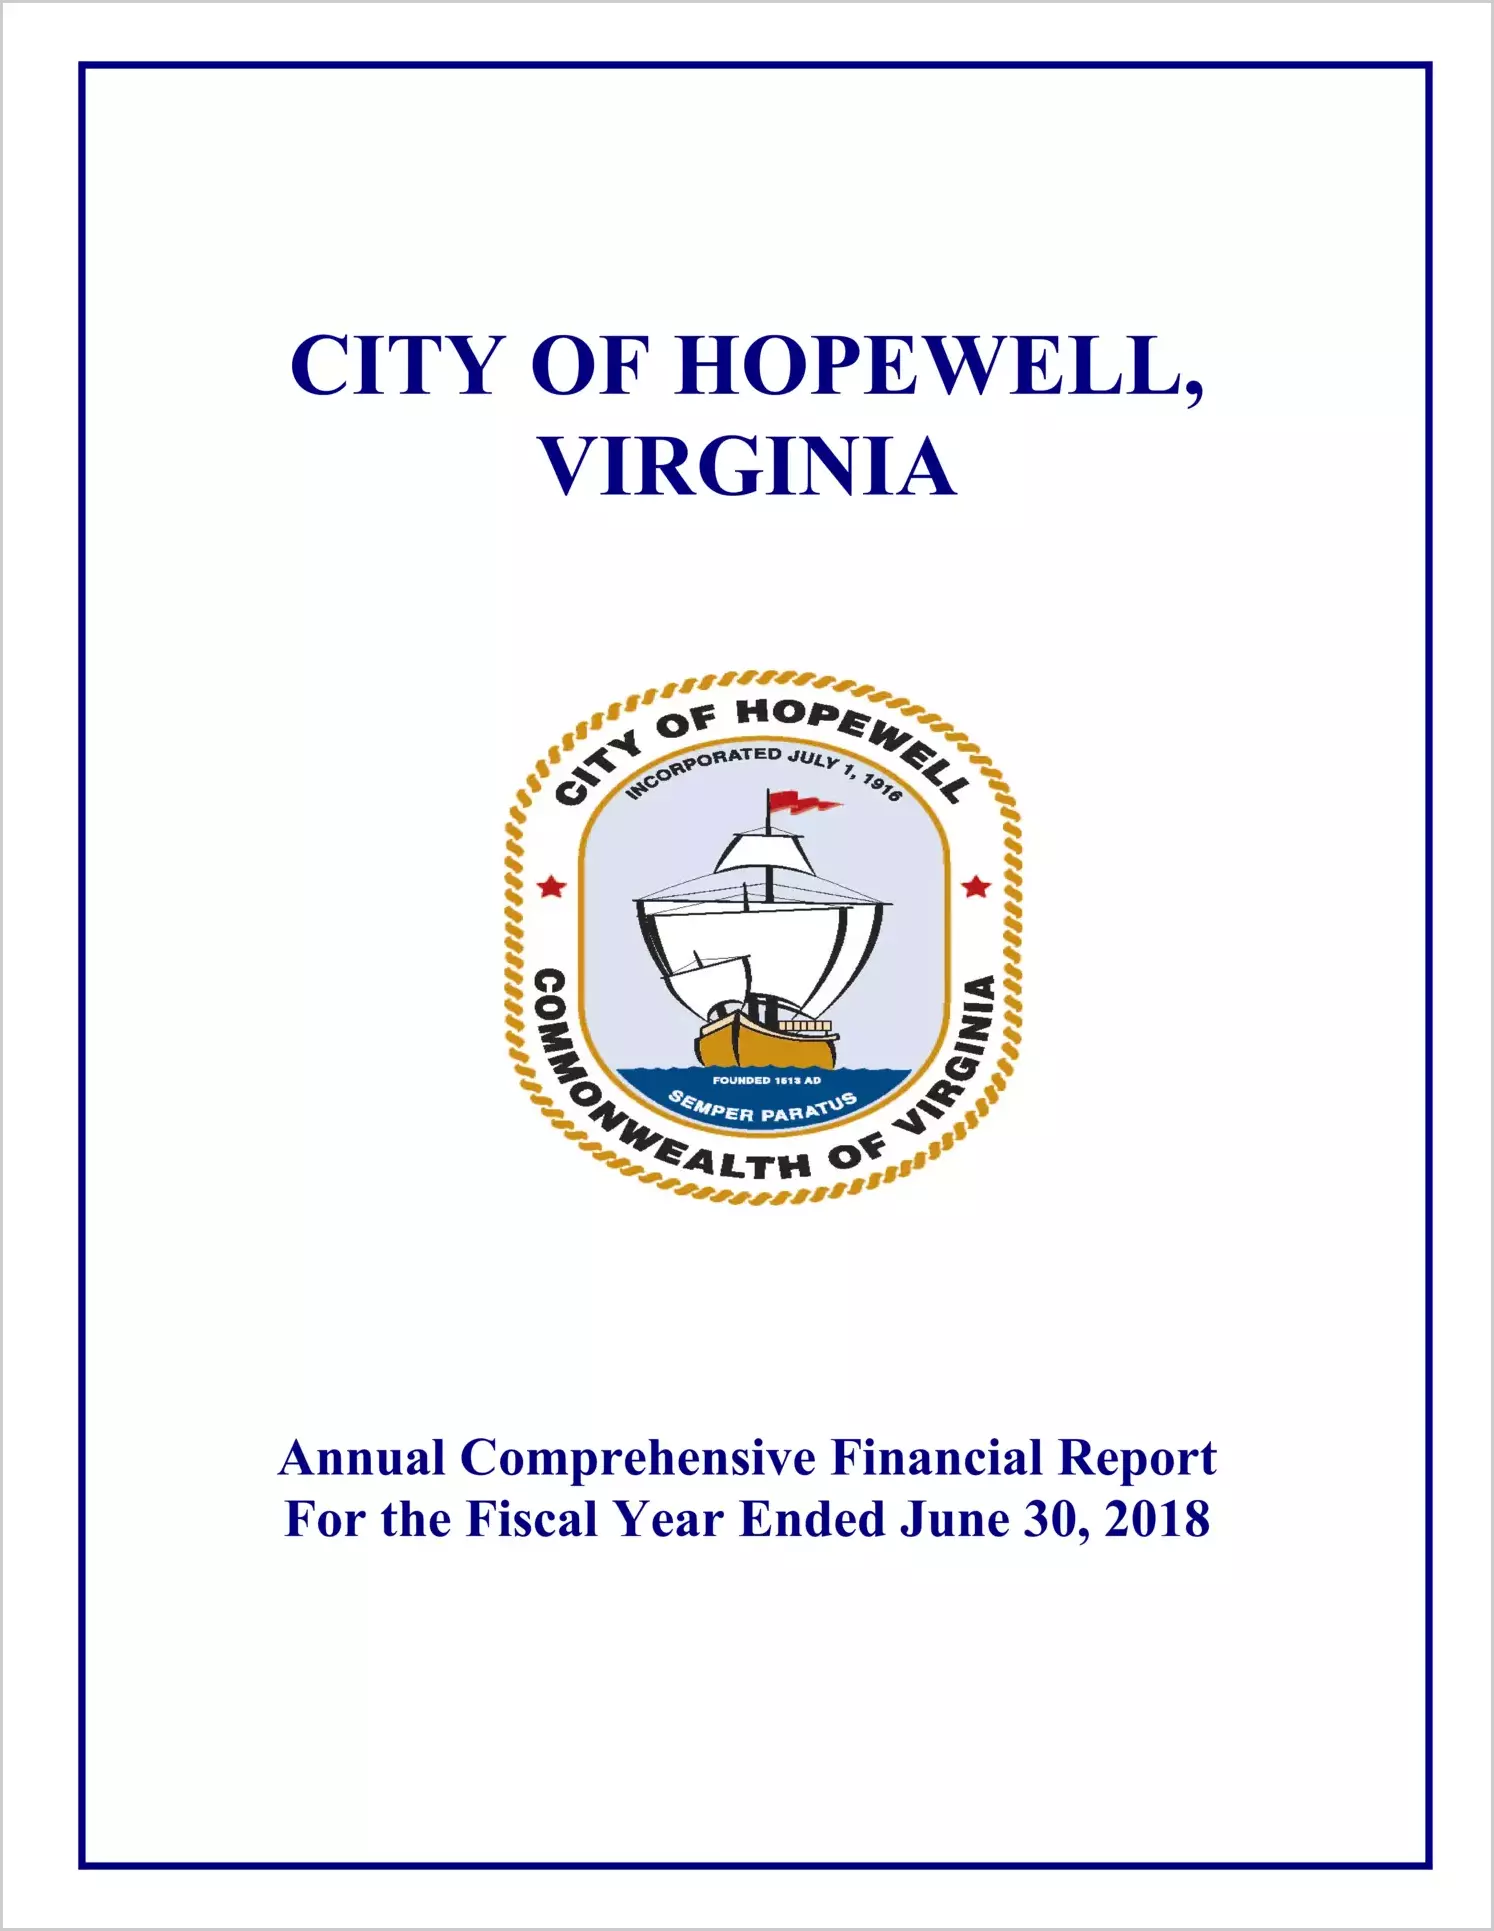 2018 Annual Financial Report for City of Hopewell